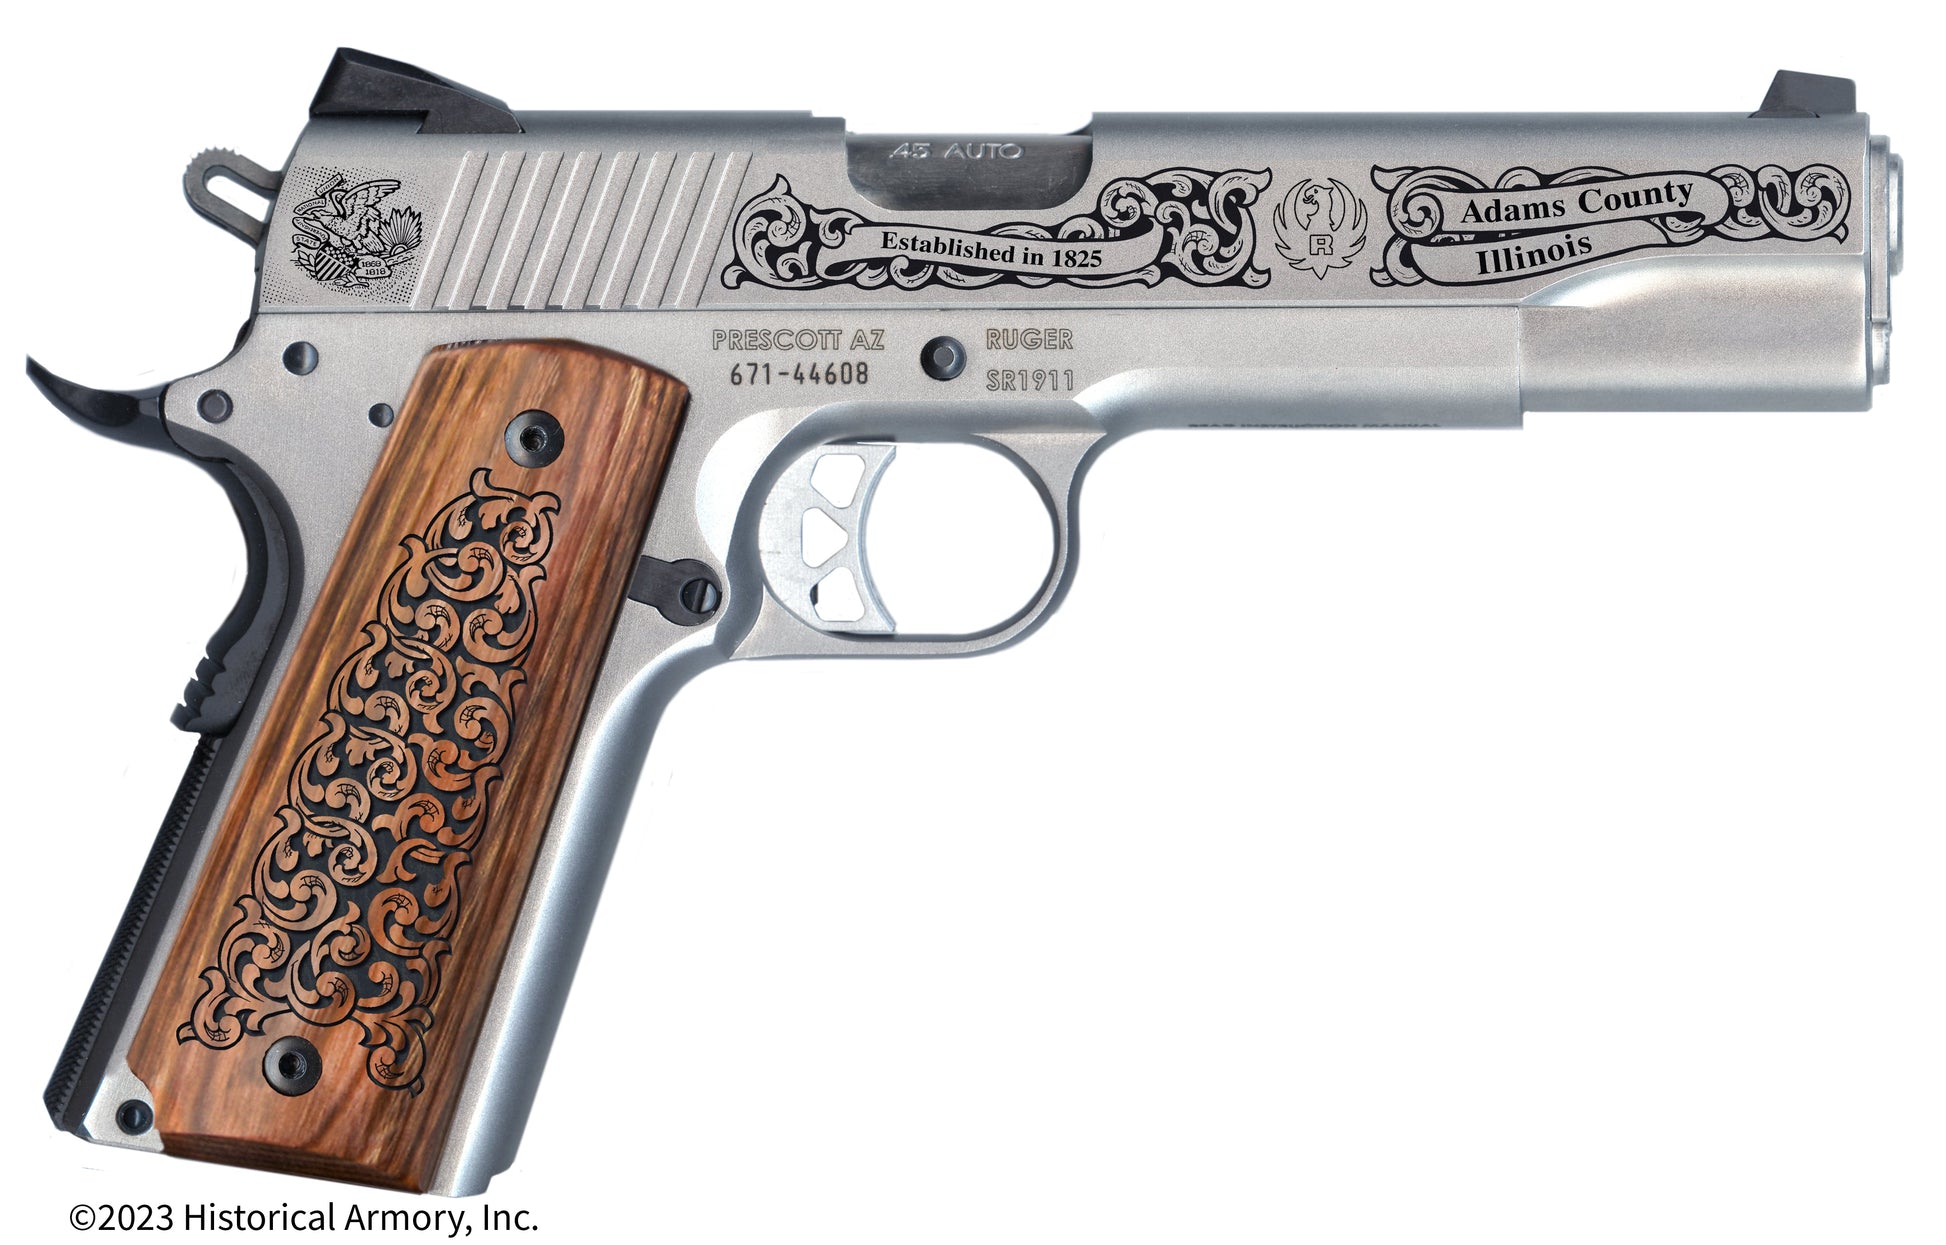 Adams County Illinois Engraved .45 Auto Ruger 1911